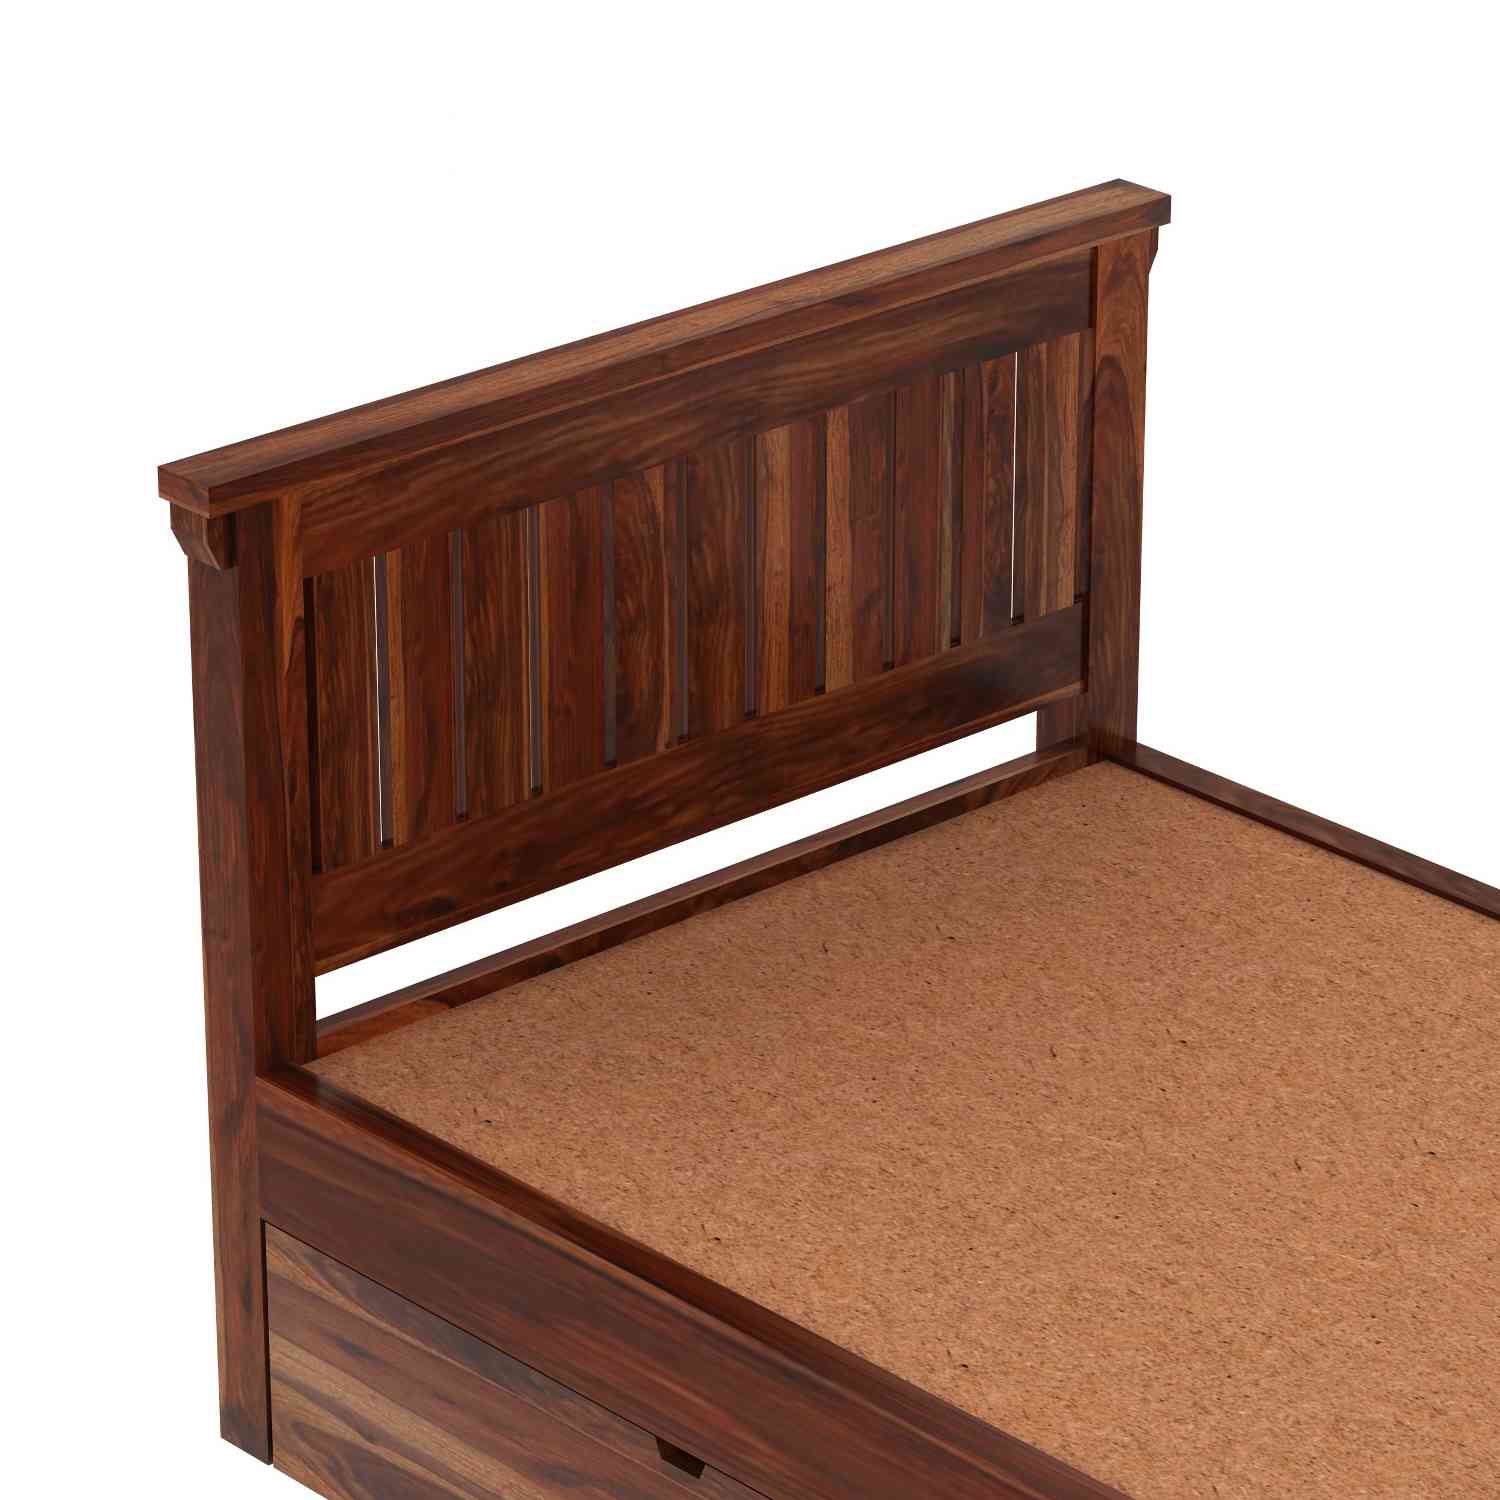 Trinity Solid Sheesham Wood Single Bed With Two Drawers (Natural Finish)